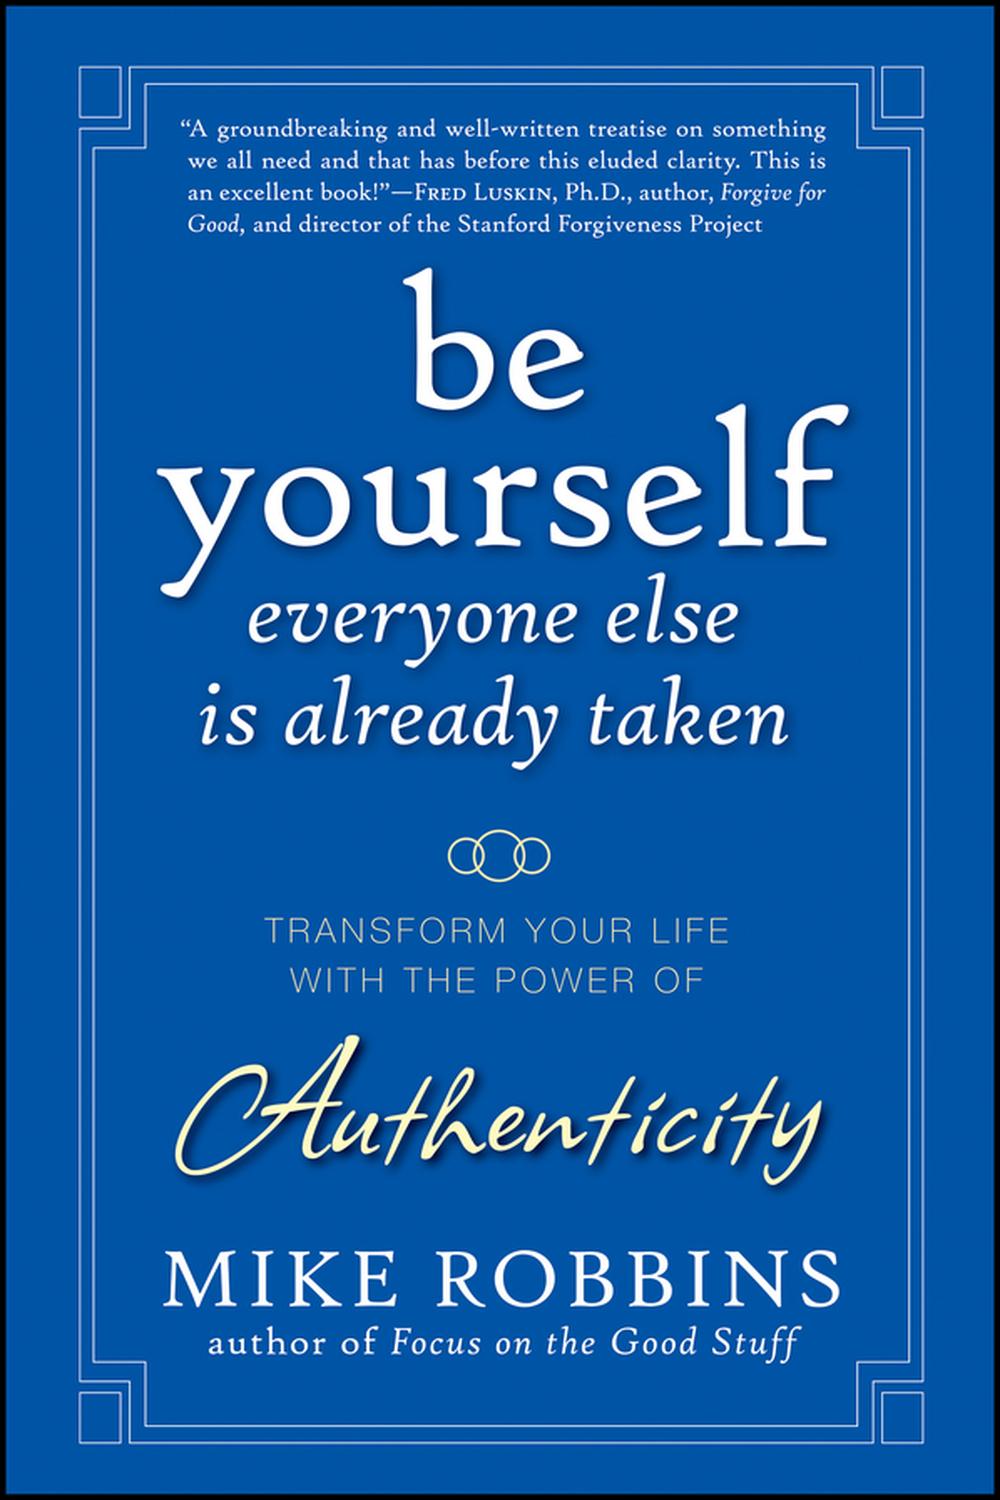 PDF] Be Yourself, Everyone Else is Already Taken by Mike Robbins 